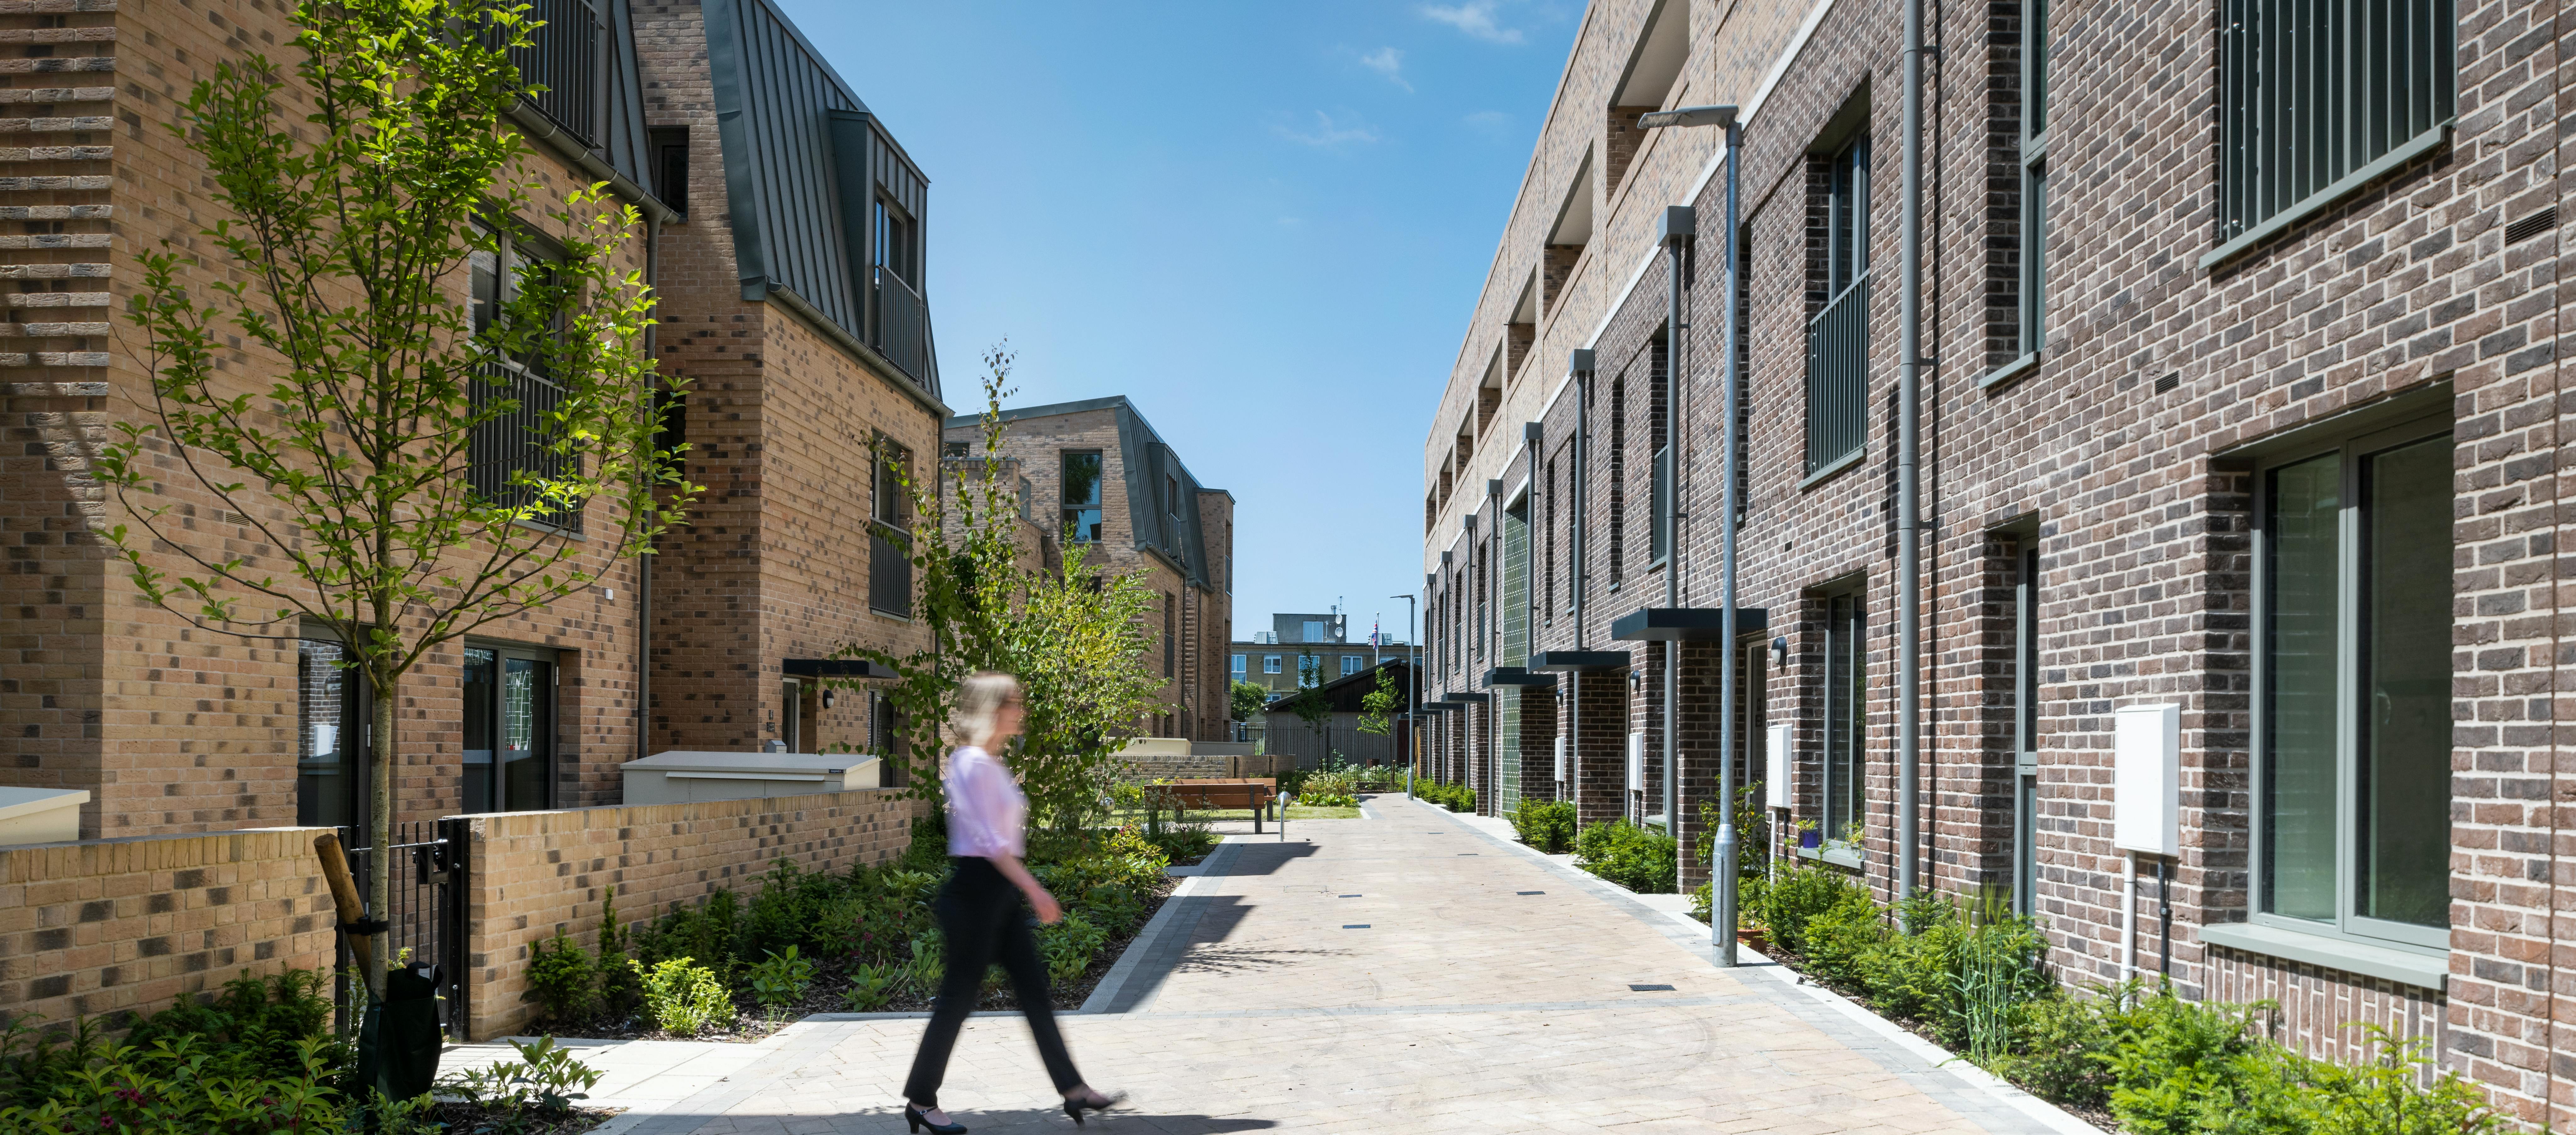 Frank Towell Court - low carbon development in Feltham